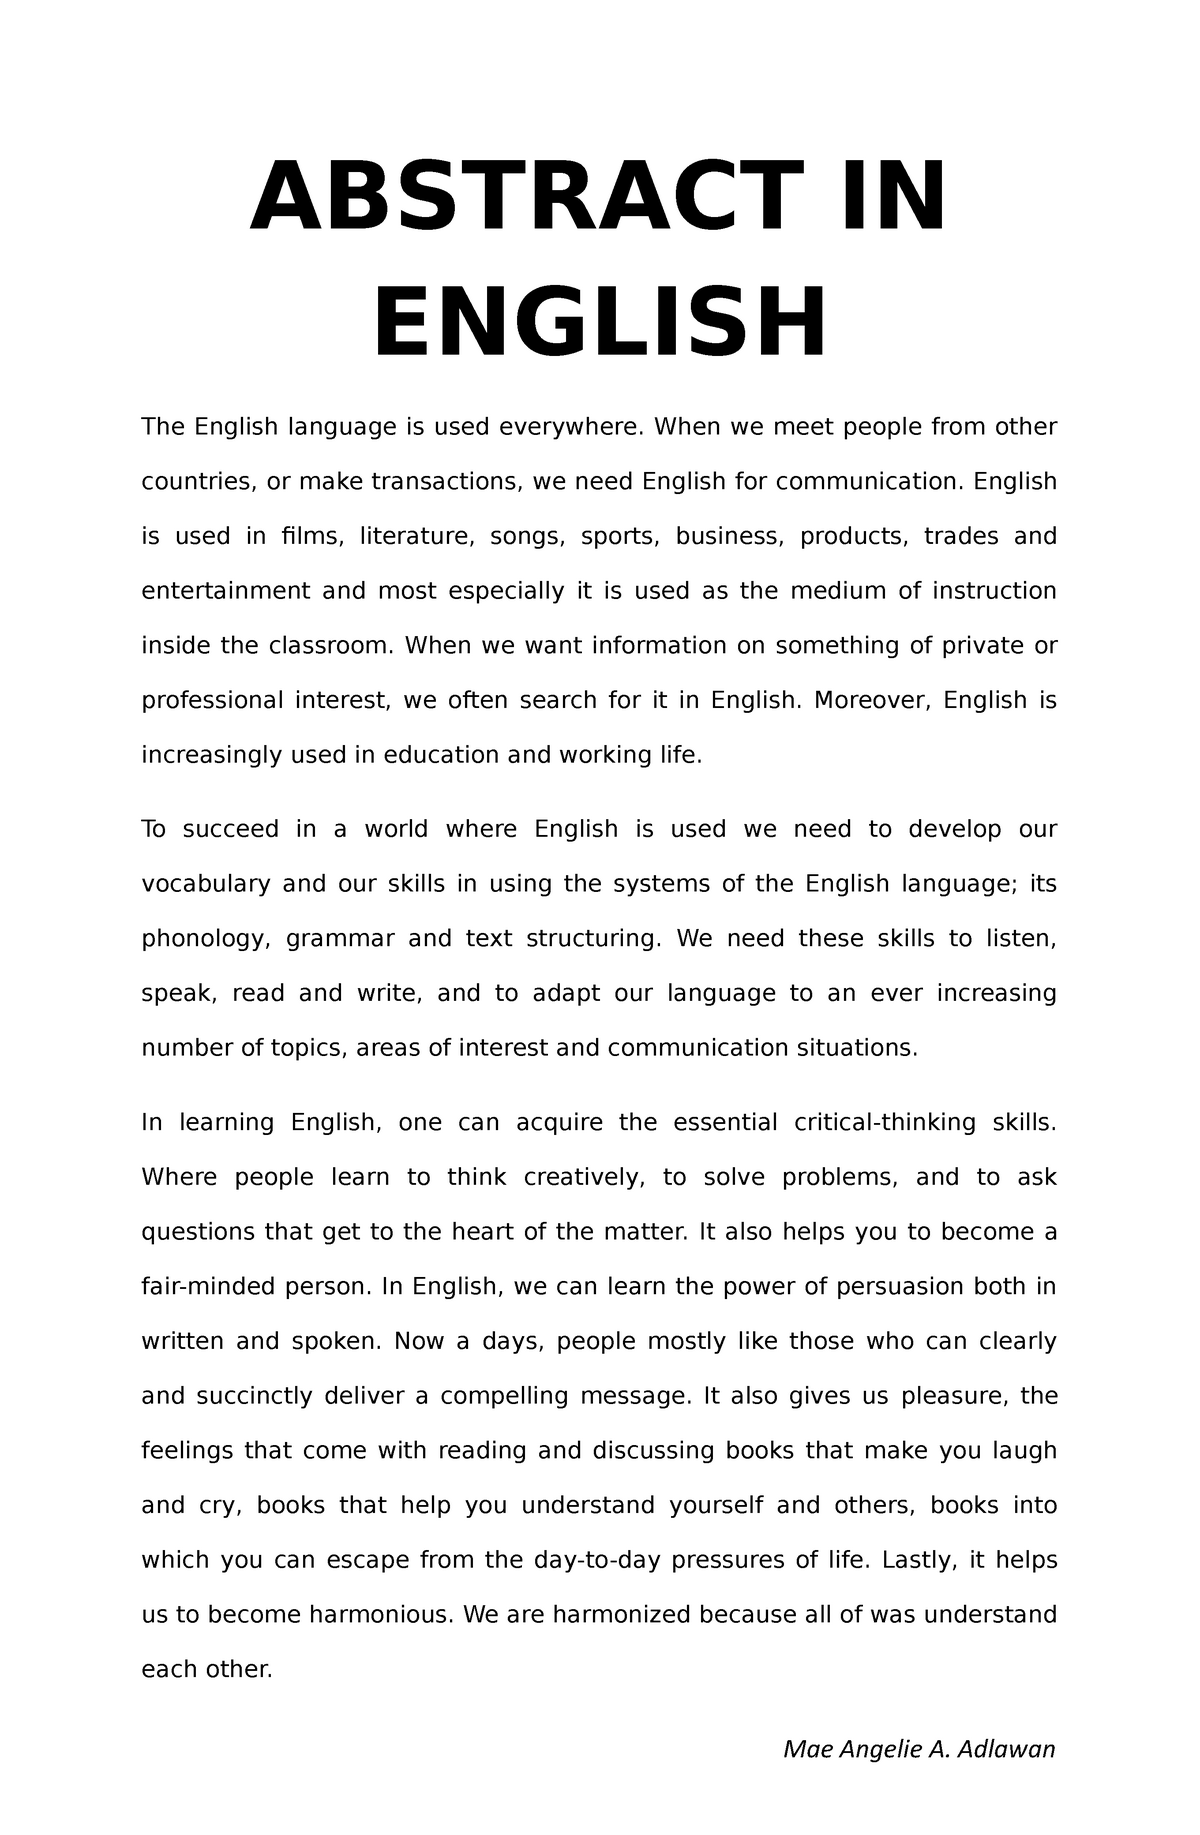 how to write abstract in english